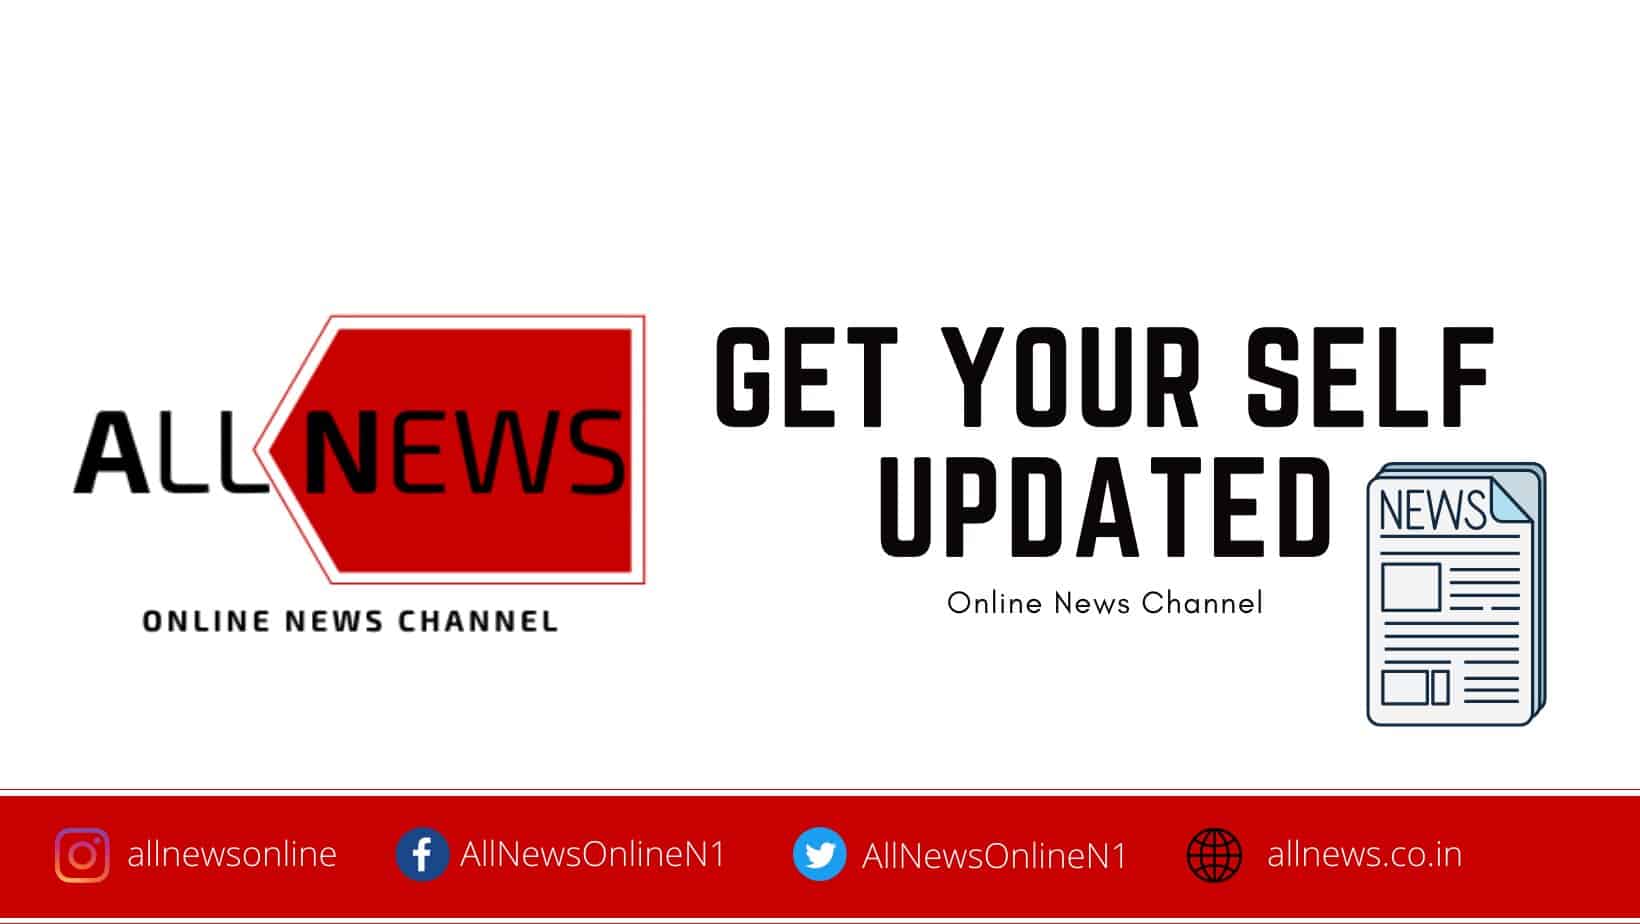 All News Online News Channel